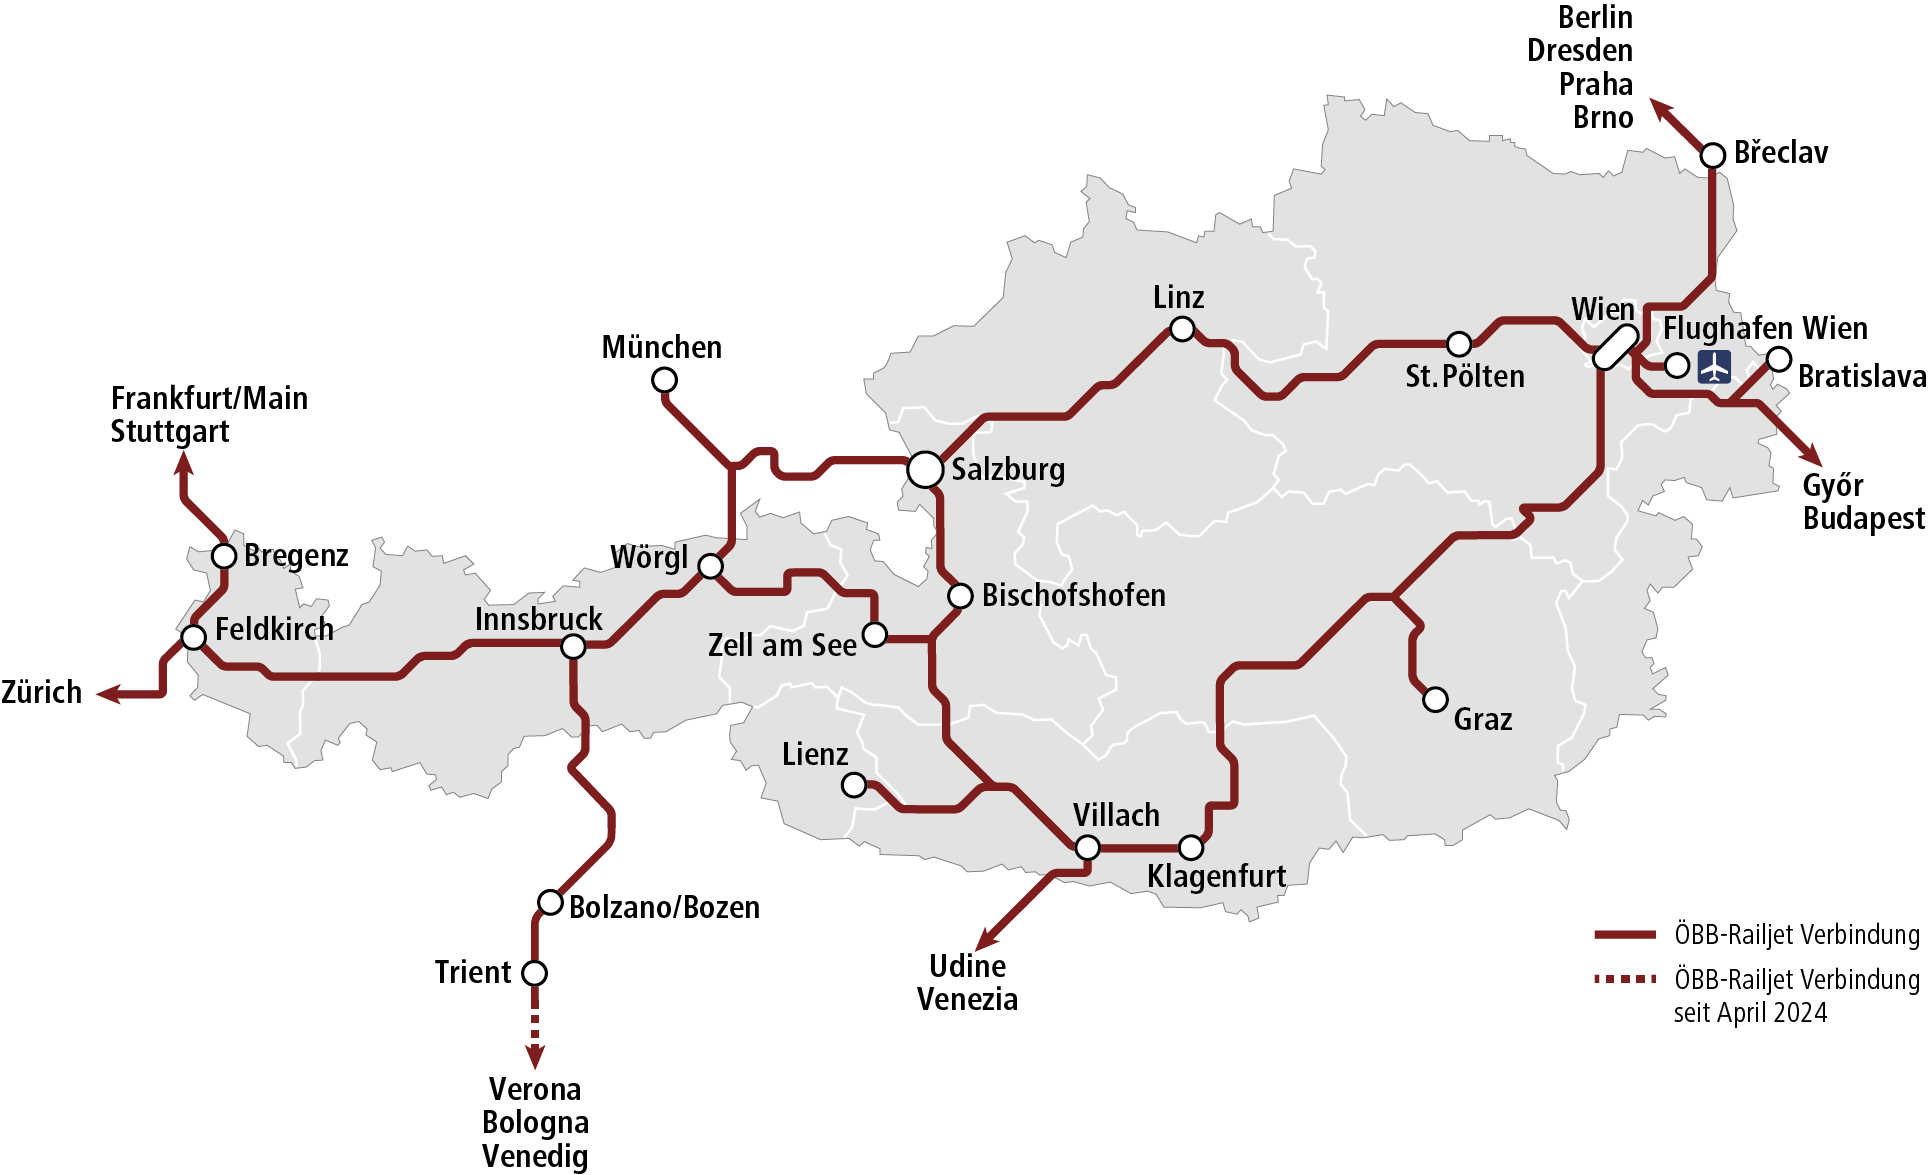 Overview of the route network of the ÖBB Railjet 